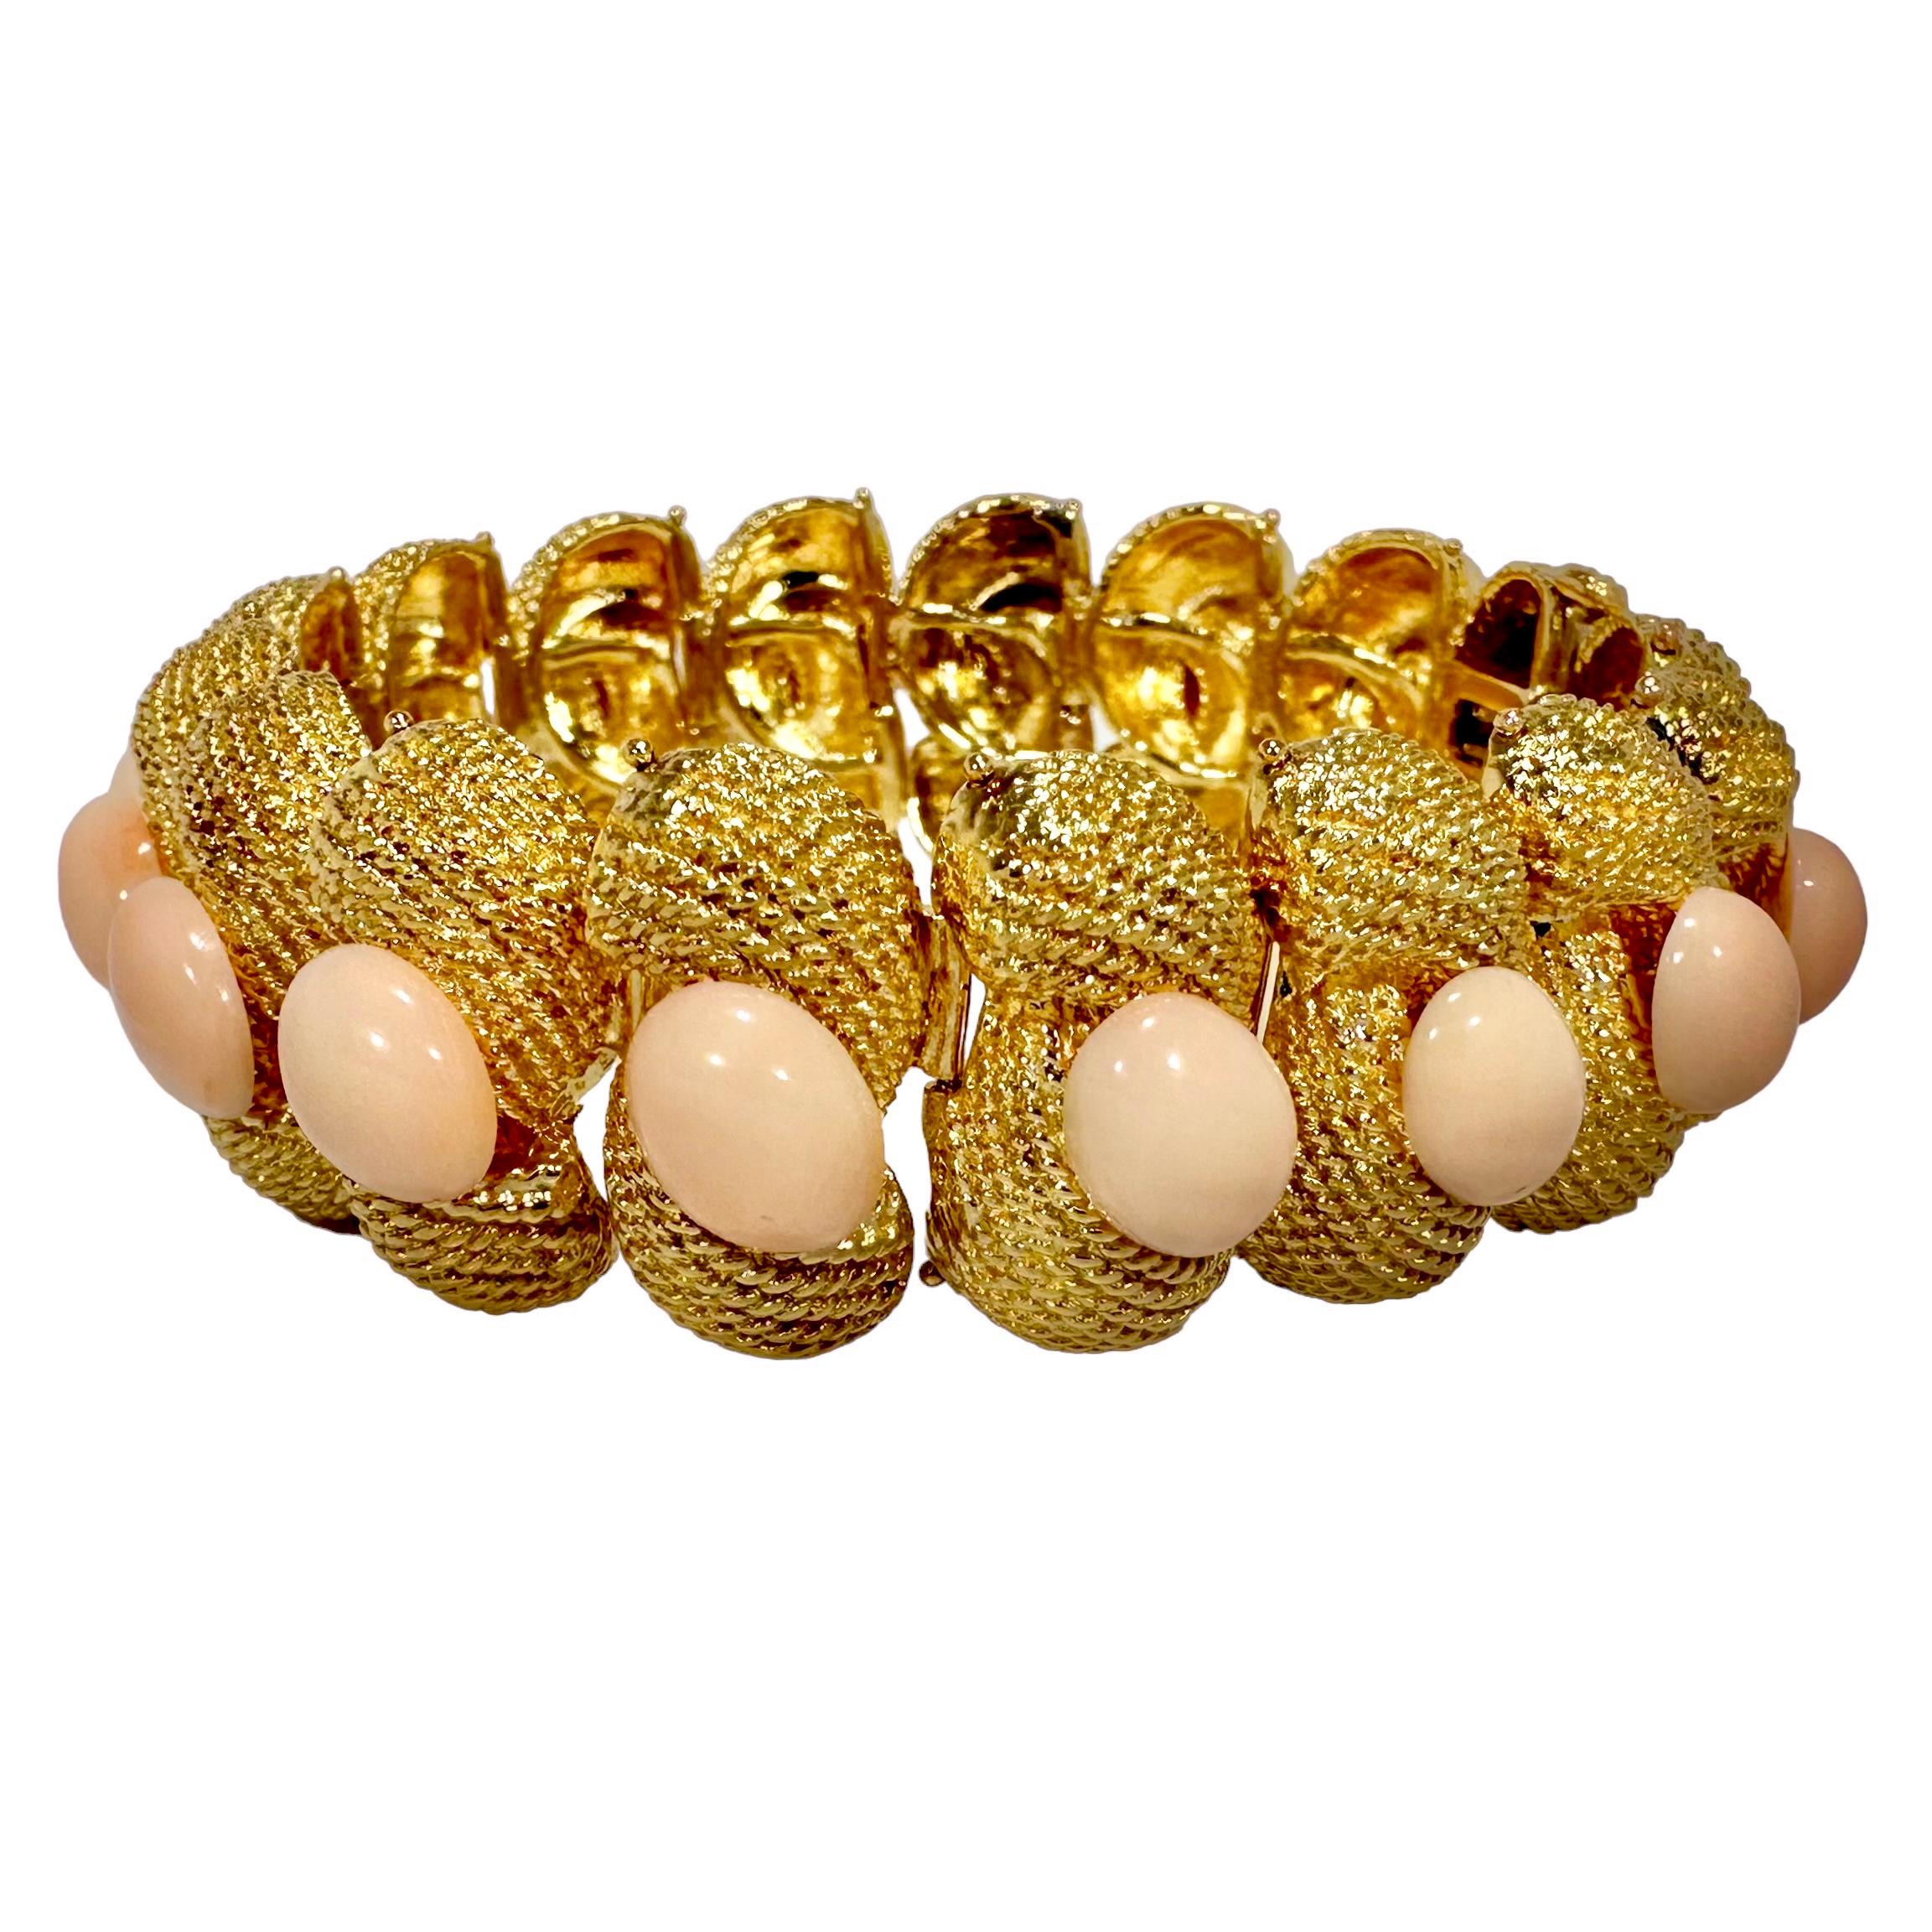 This lovely 18k yellow gold and Angel Skin coral cocktail bracelet is big and bold, capturing the optimism and positivity of mid-century America and the world at large. Deftly crafted and textured links depicting twisted rope swaddle a total of